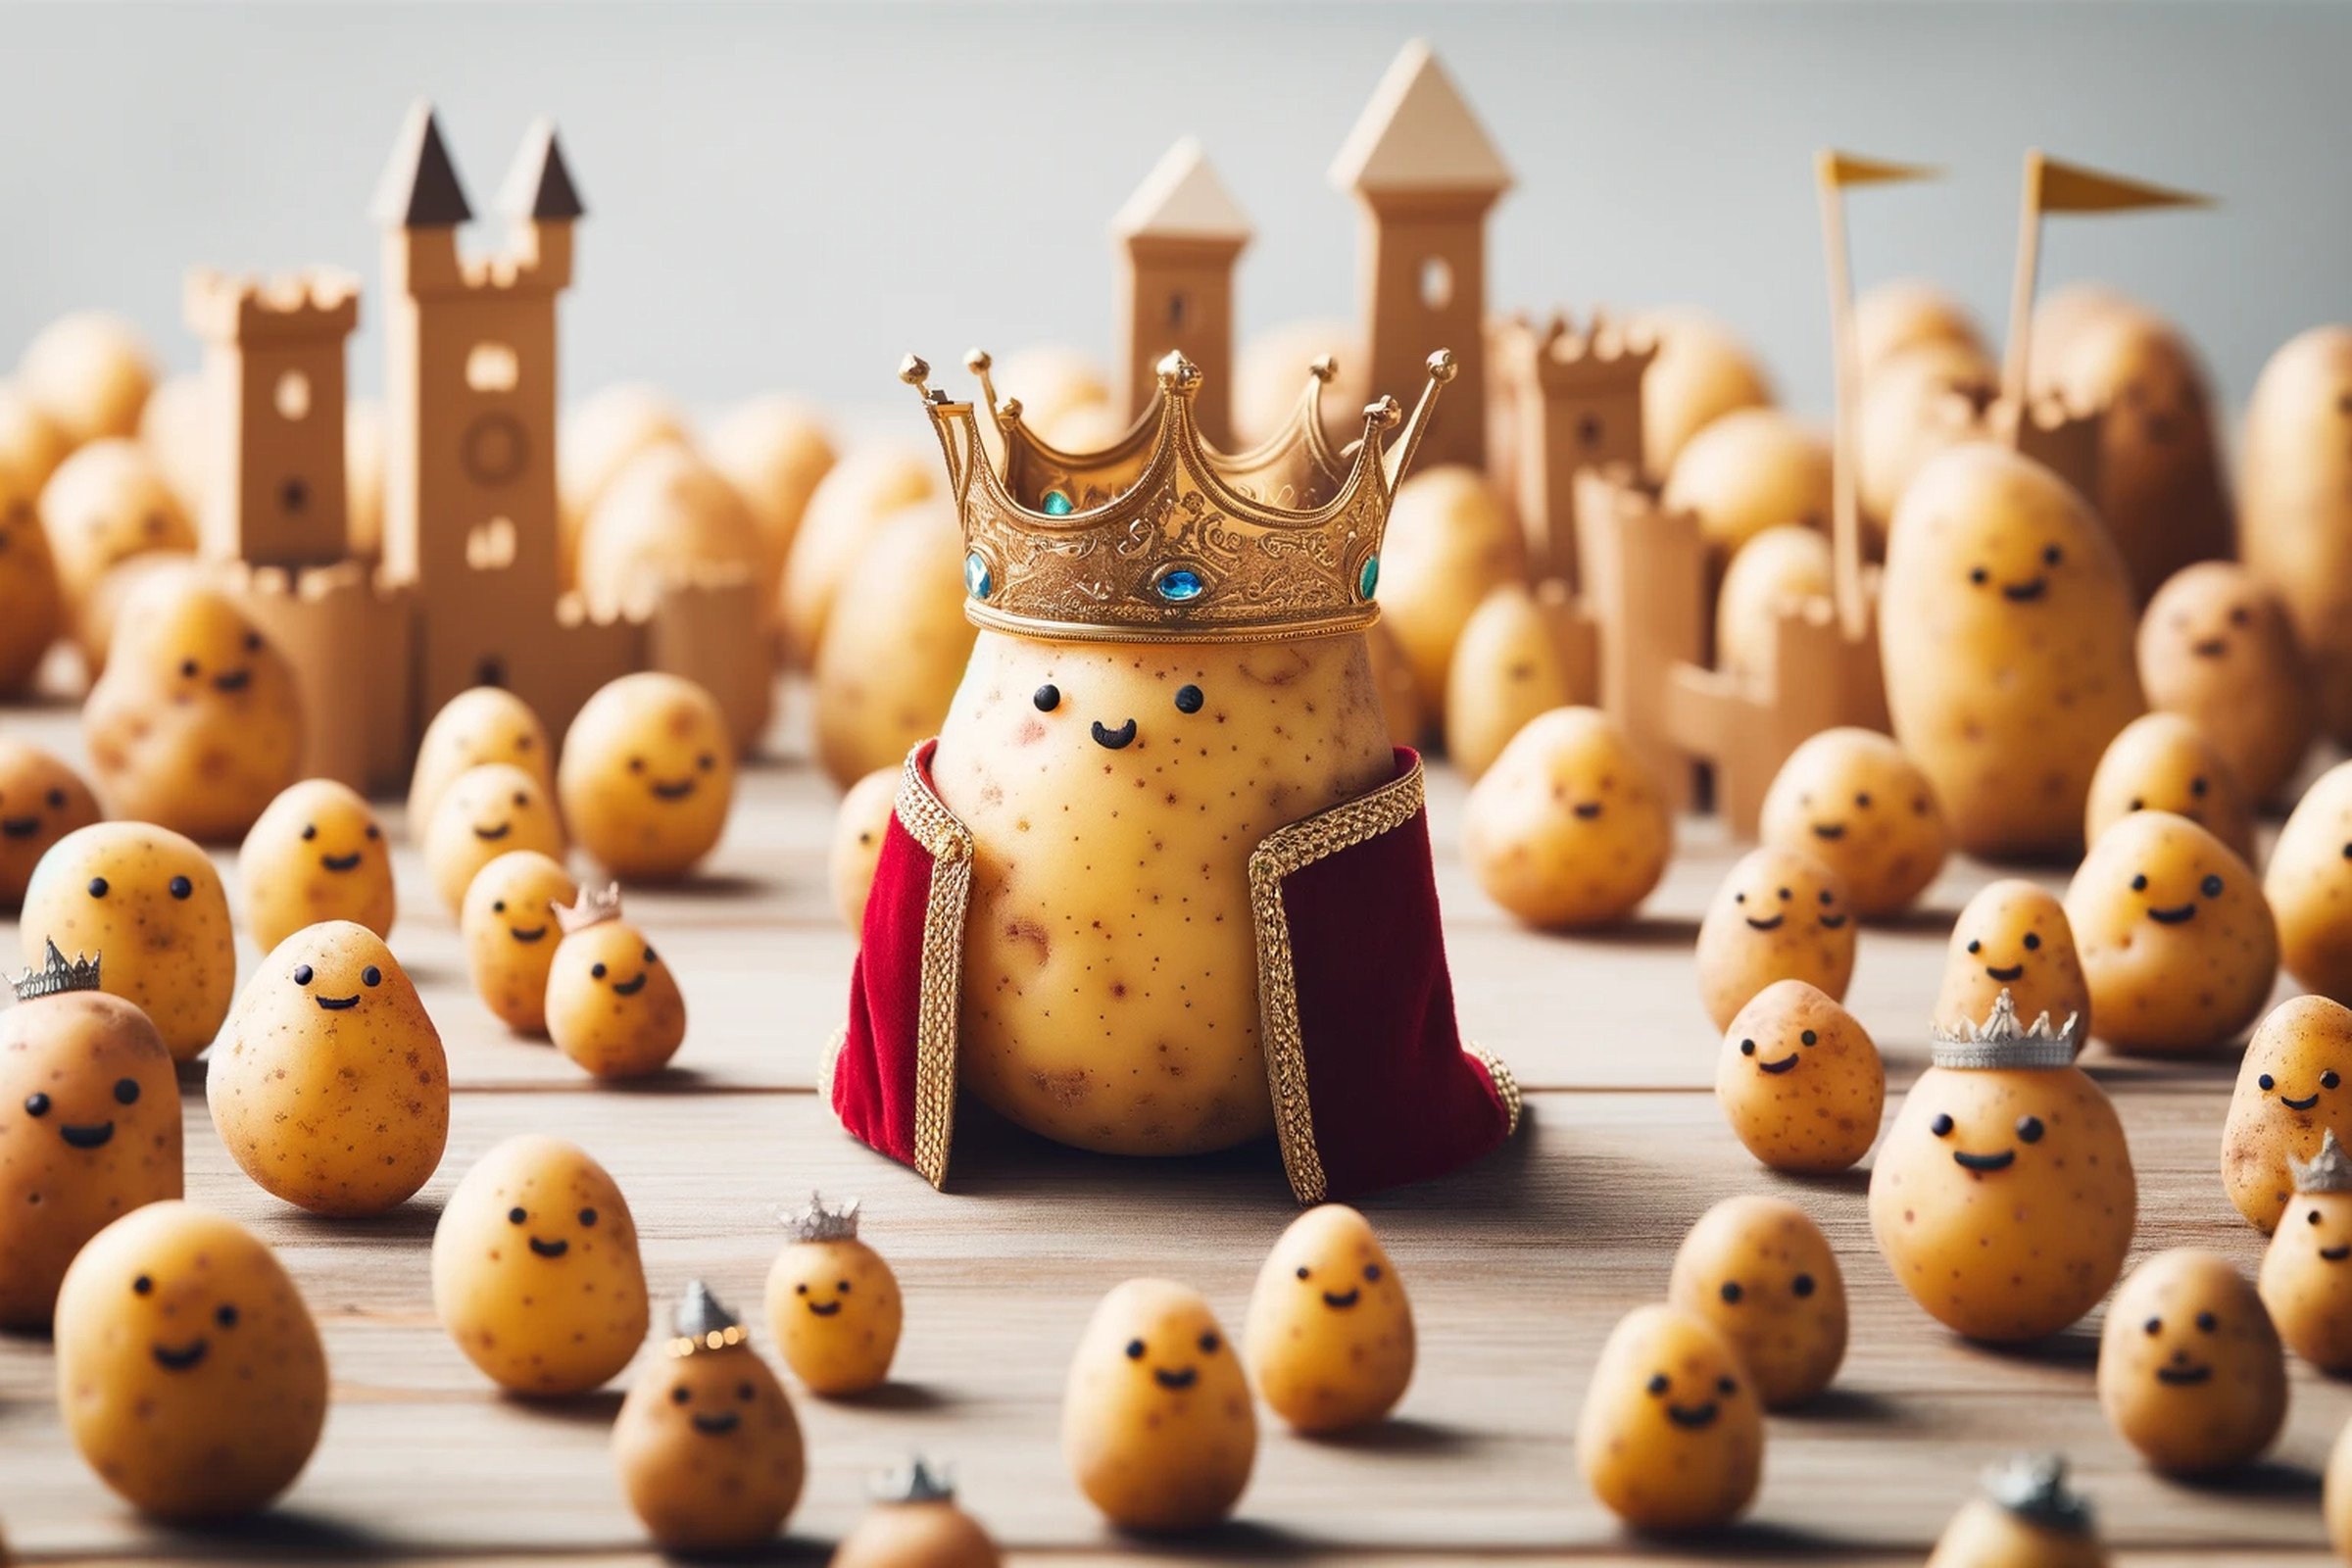 King Potato surrounded by minion potatoes created by DALL-E 3